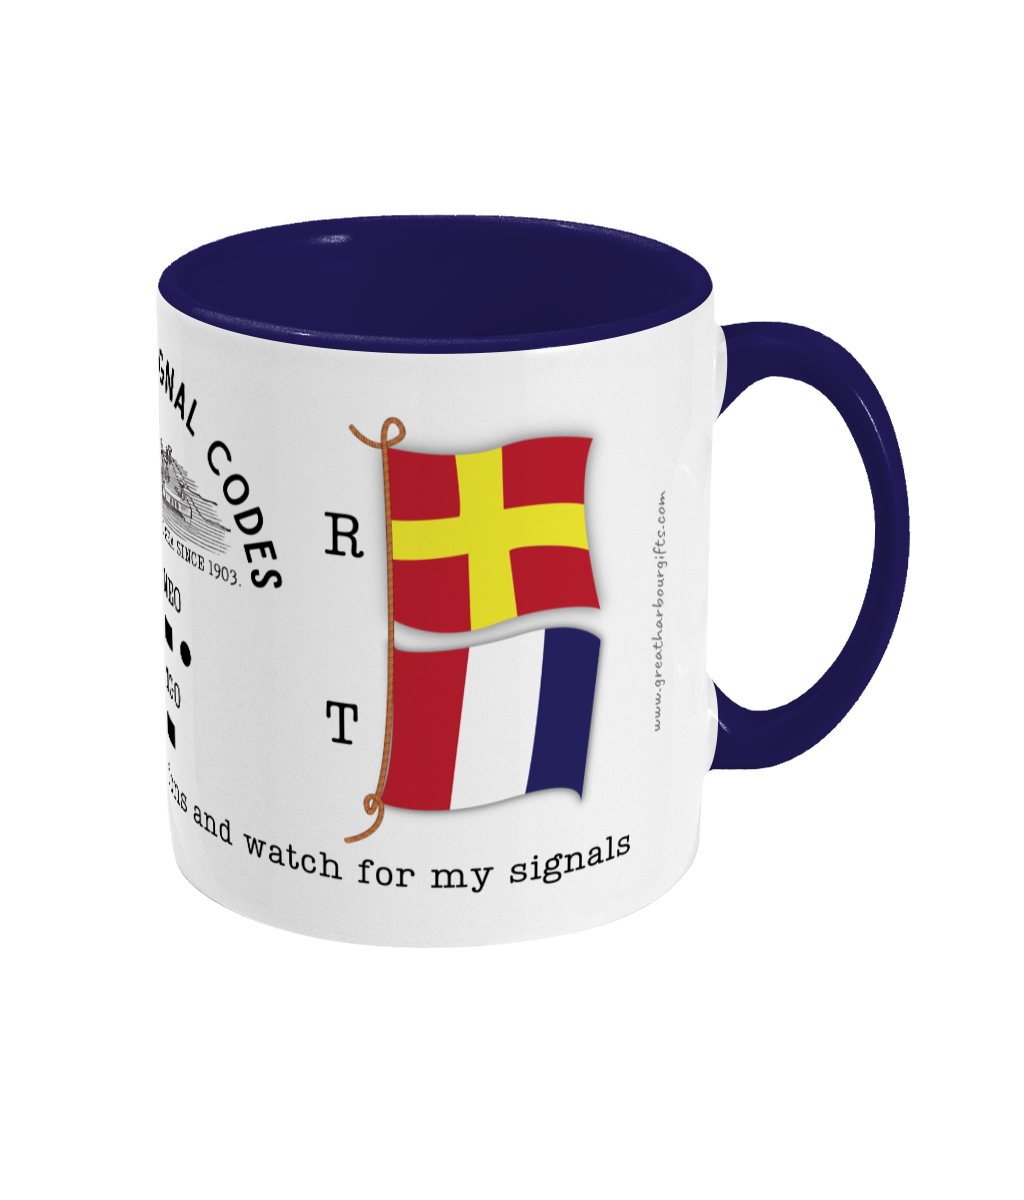 Nautical code flag mug, Stop carrying out your Intentions and watch for my signals Great Harbour Gifts